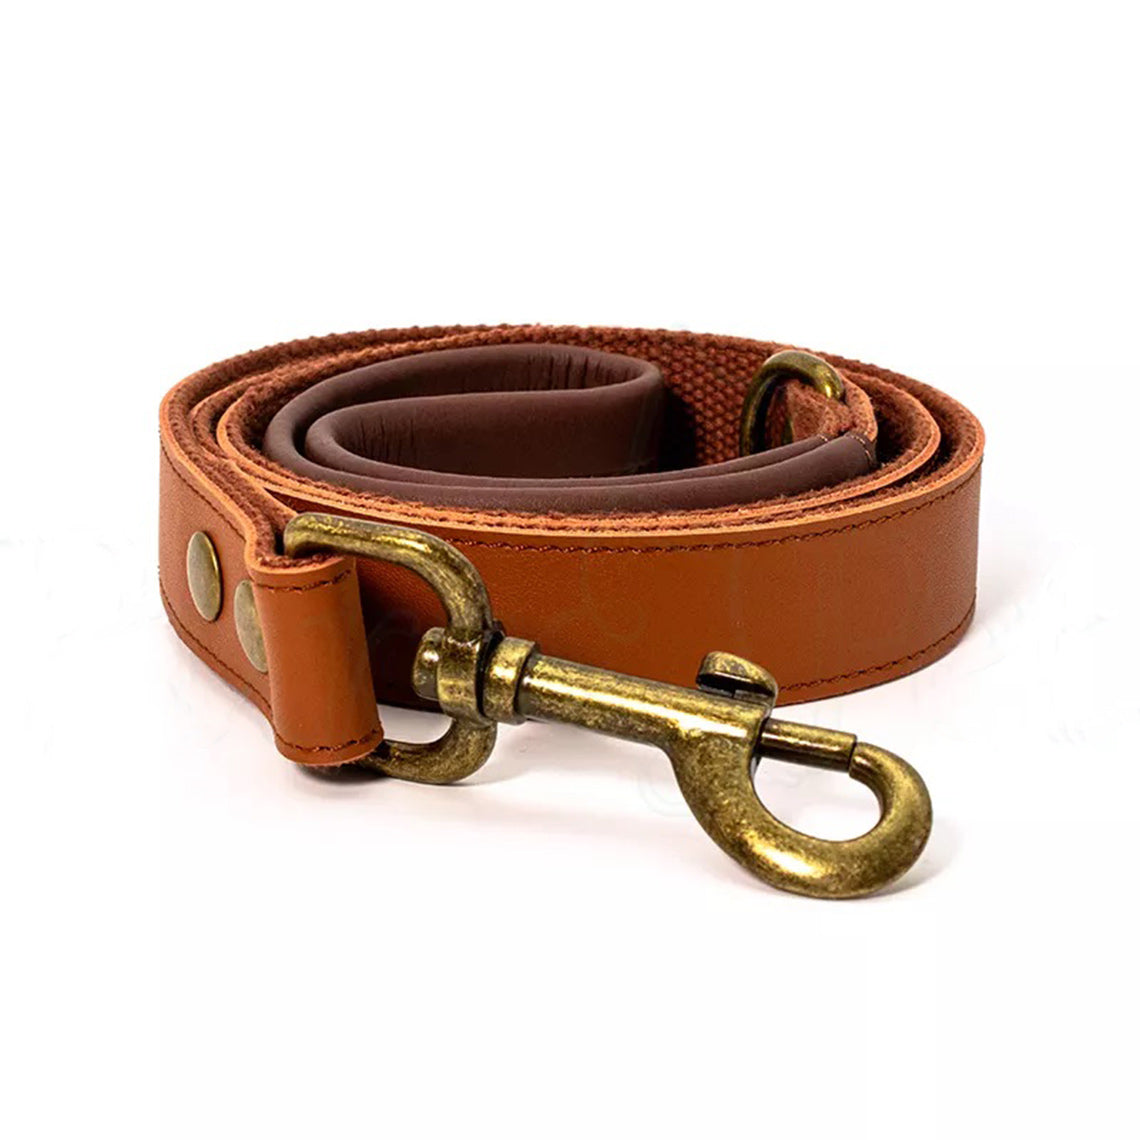 Genuine Leather Brown Dog Leash with Heavy Duty Hook Clip